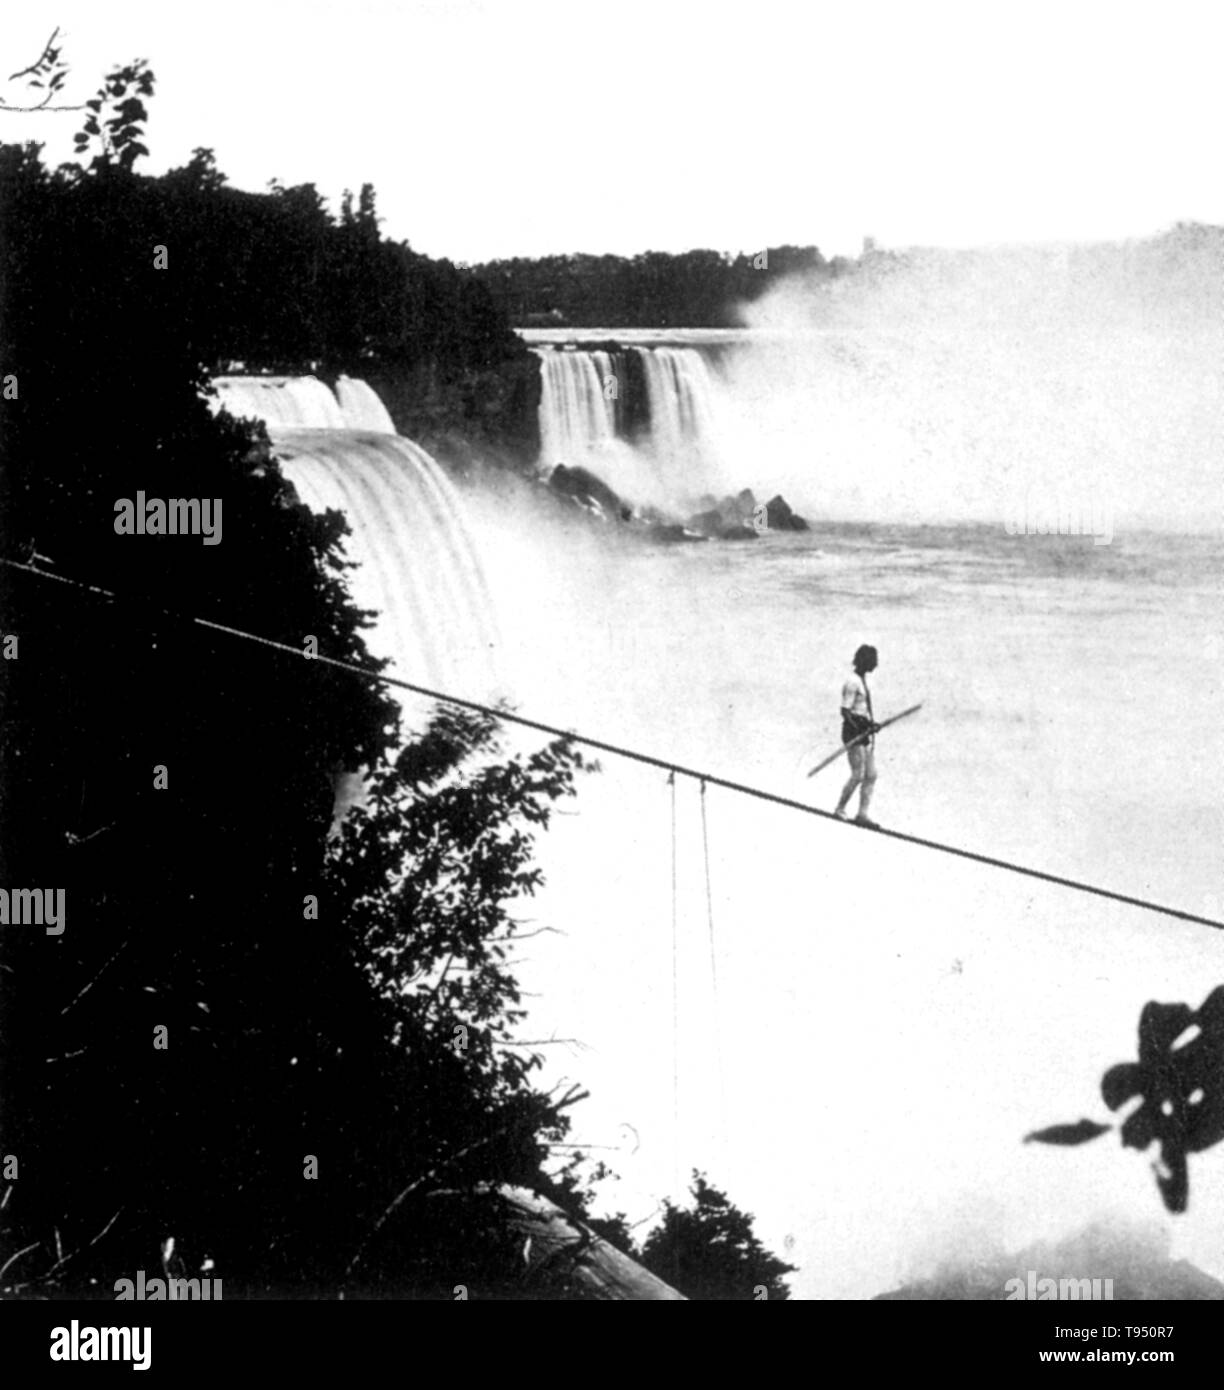 Henry Bellini (1841 - 1888) was an English tightrope walker. In 1873, at the age of 32, he went to Niagara Falls. On August 25th 1873, he made his first tight rope walk across the Niagara River using a 1,500 foot long - 2.5 inch diameter rope weighing 2,500 pounds. He combined a tight rope walk with a leap into the churning river below. He tried crossing using a 48 pound - 22 foot long balance pole. Following his leap into the water, Bellini was picked up by an awaiting boat. Stock Photo